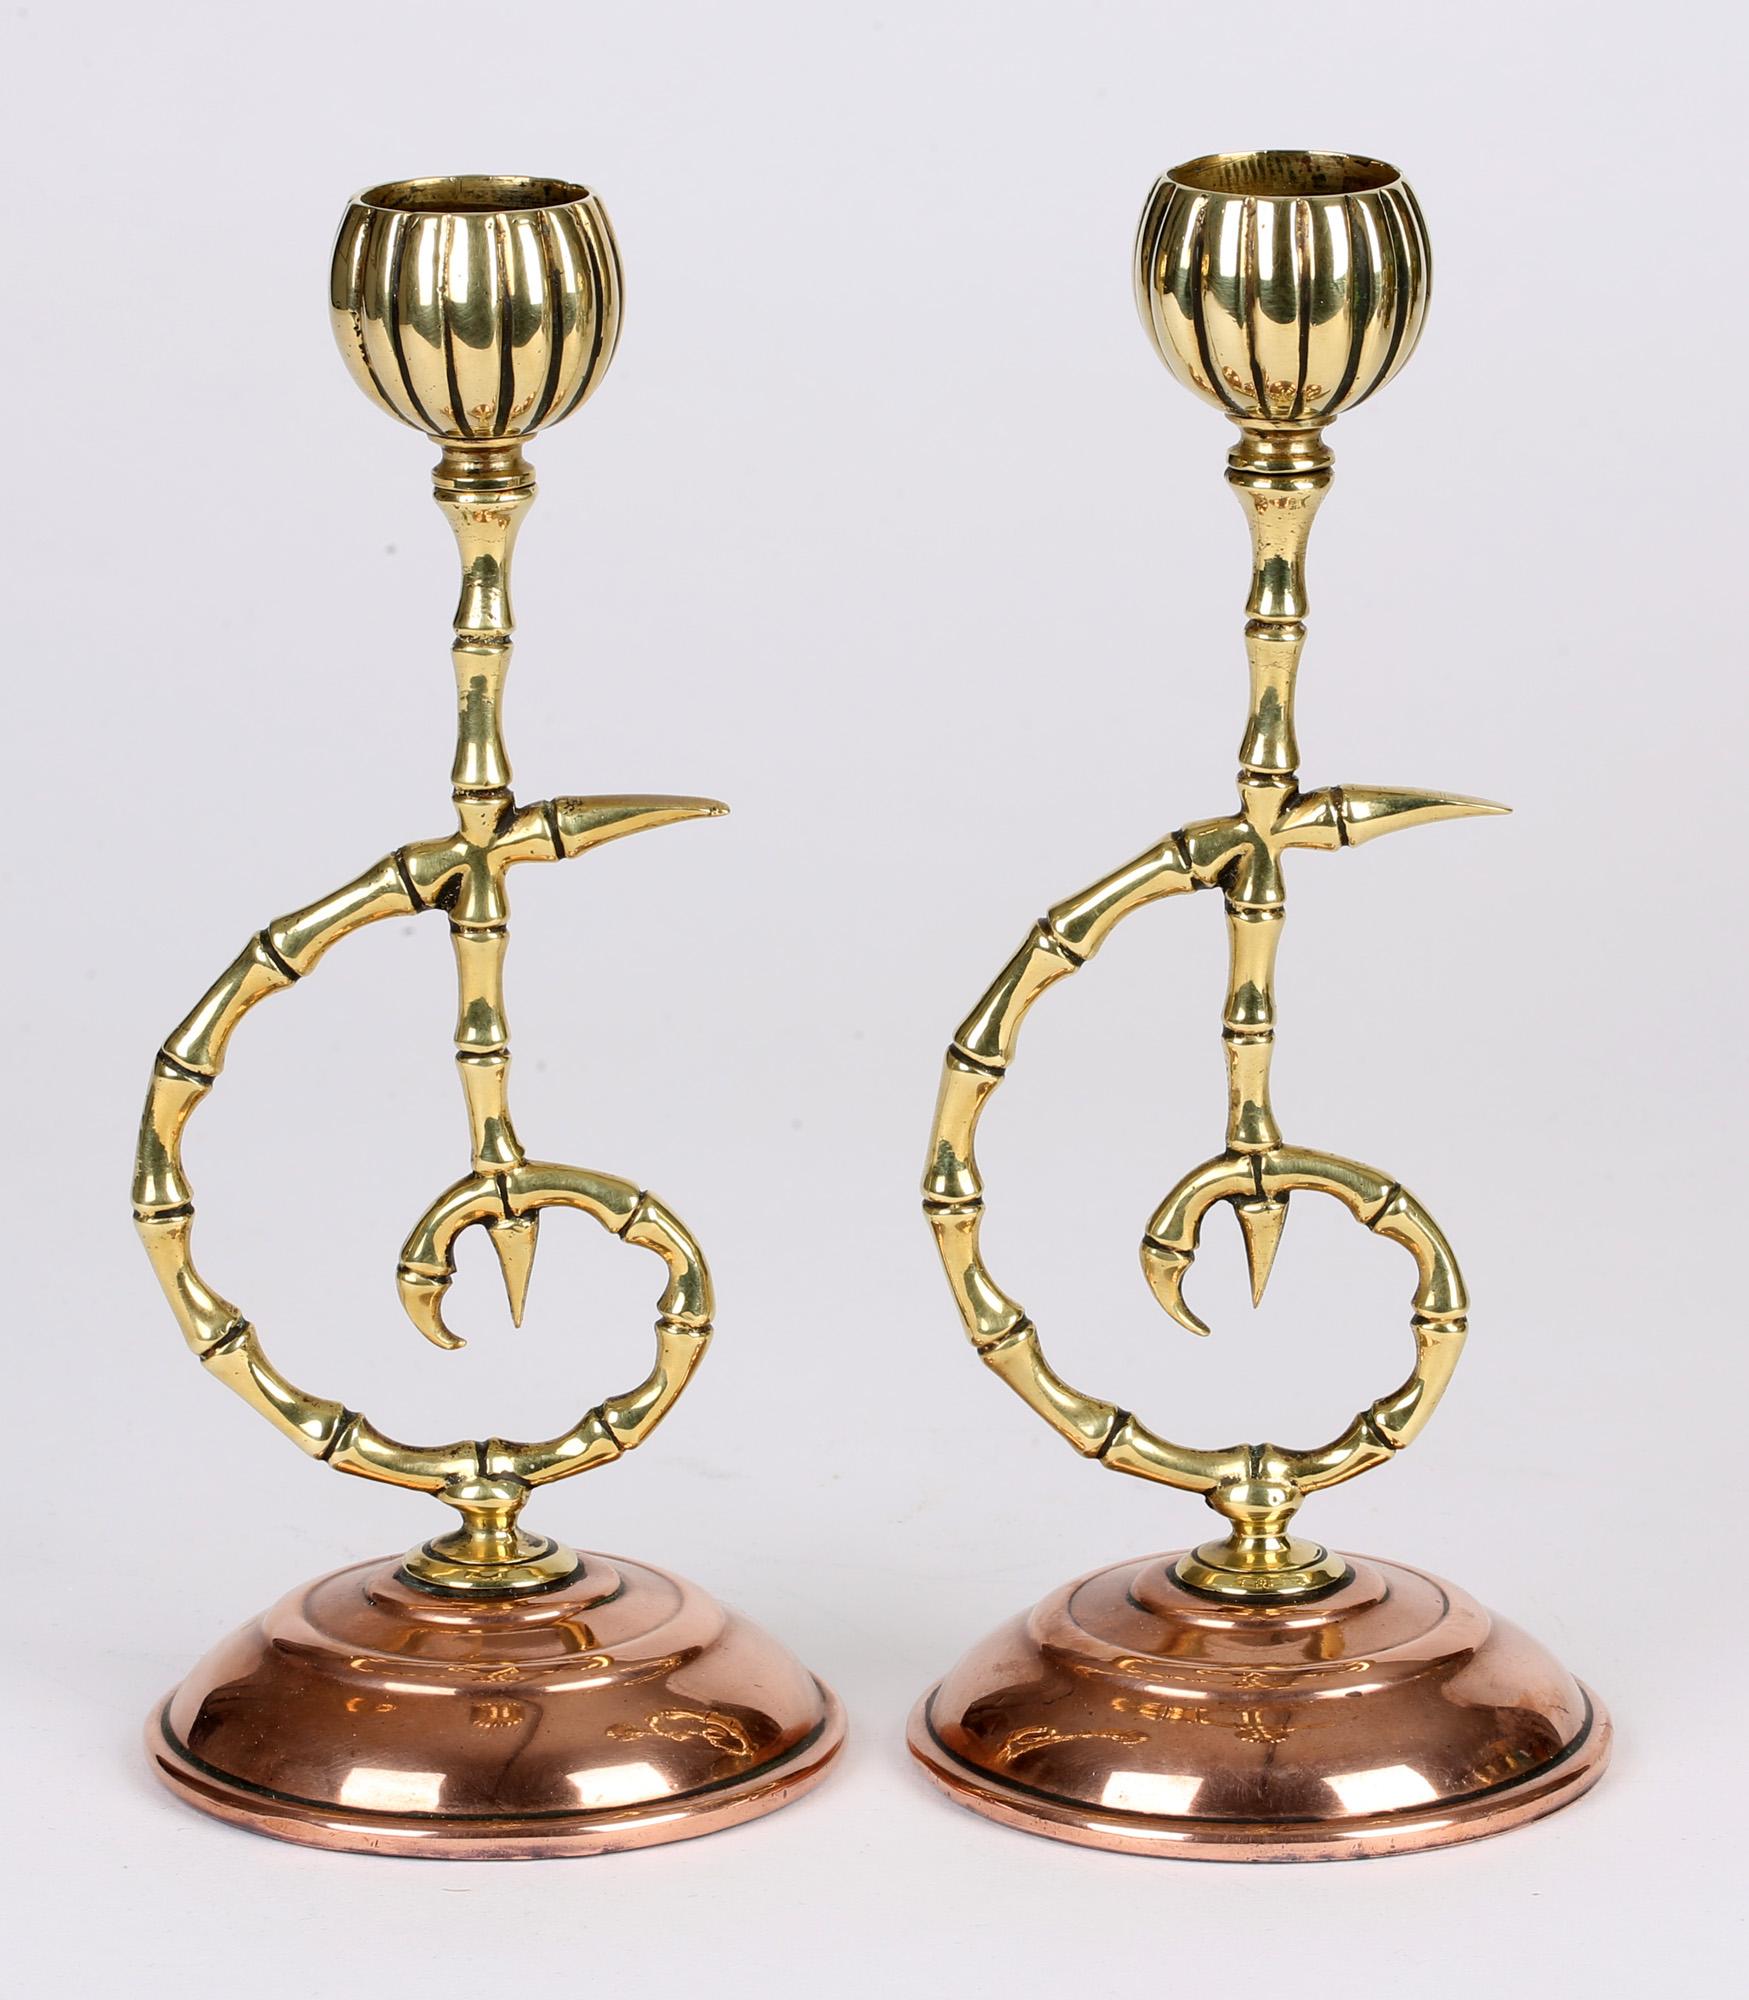 Townsend & Co Aesthetic Movement Brass and Copper Bamboo Candlesticks In Good Condition For Sale In Bishop's Stortford, Hertfordshire